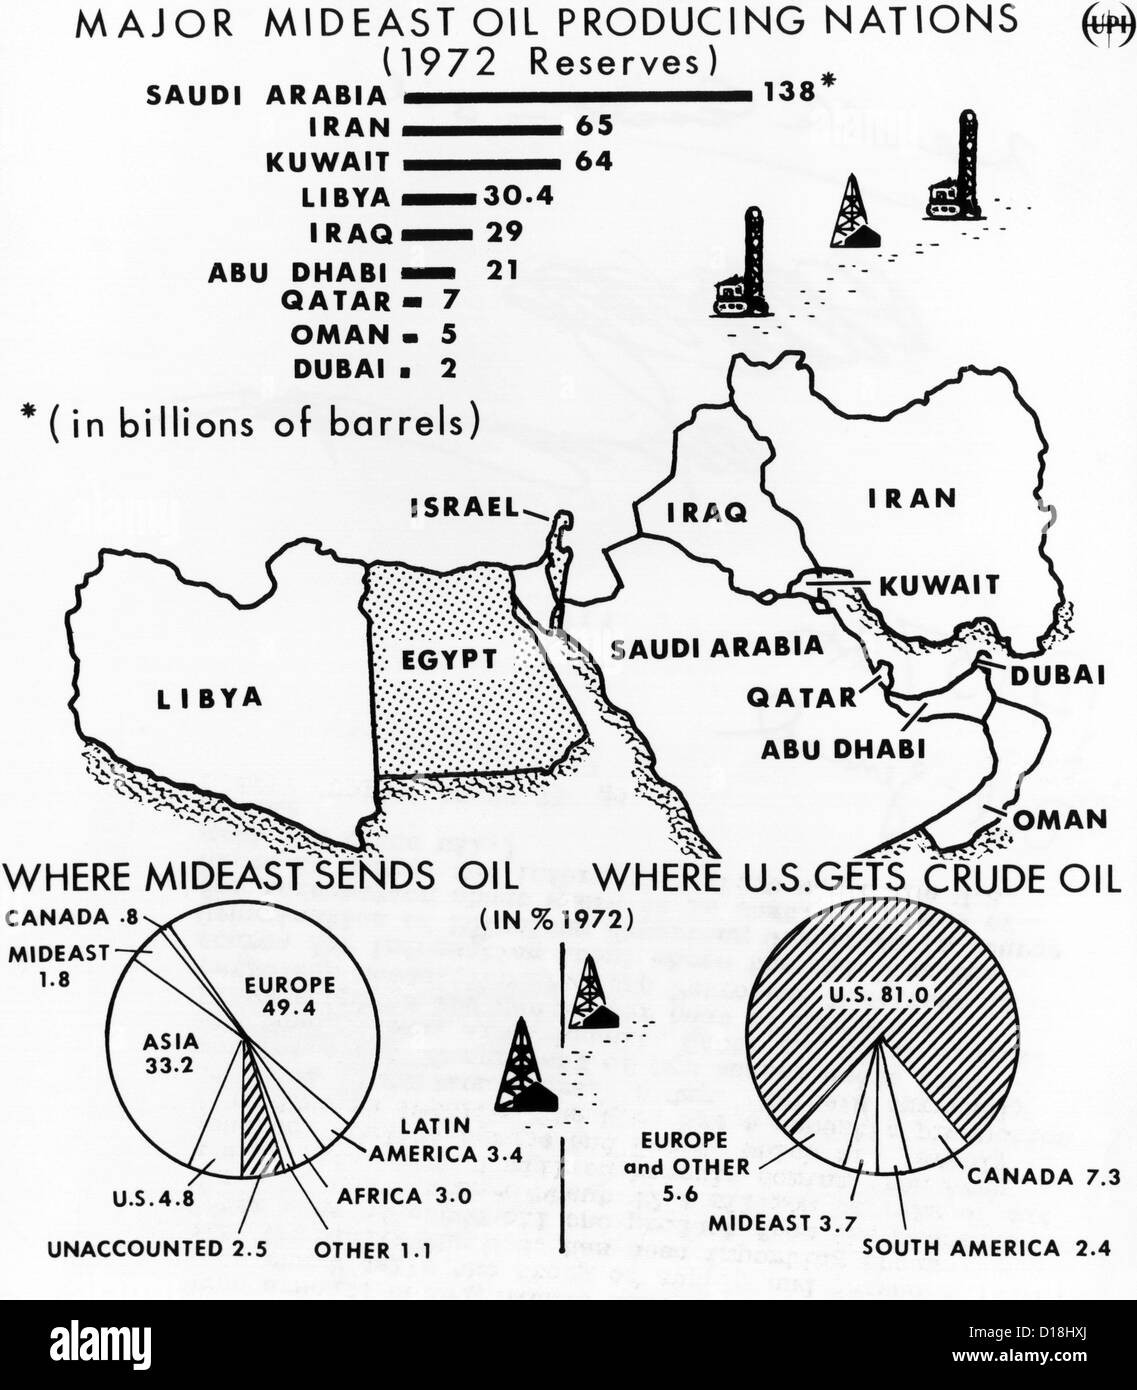 Map of the Major Mideast Oil Producing Nations. In 1973 the US produced 81% of its crude oil and imported only 4.8% from the Stock Photo